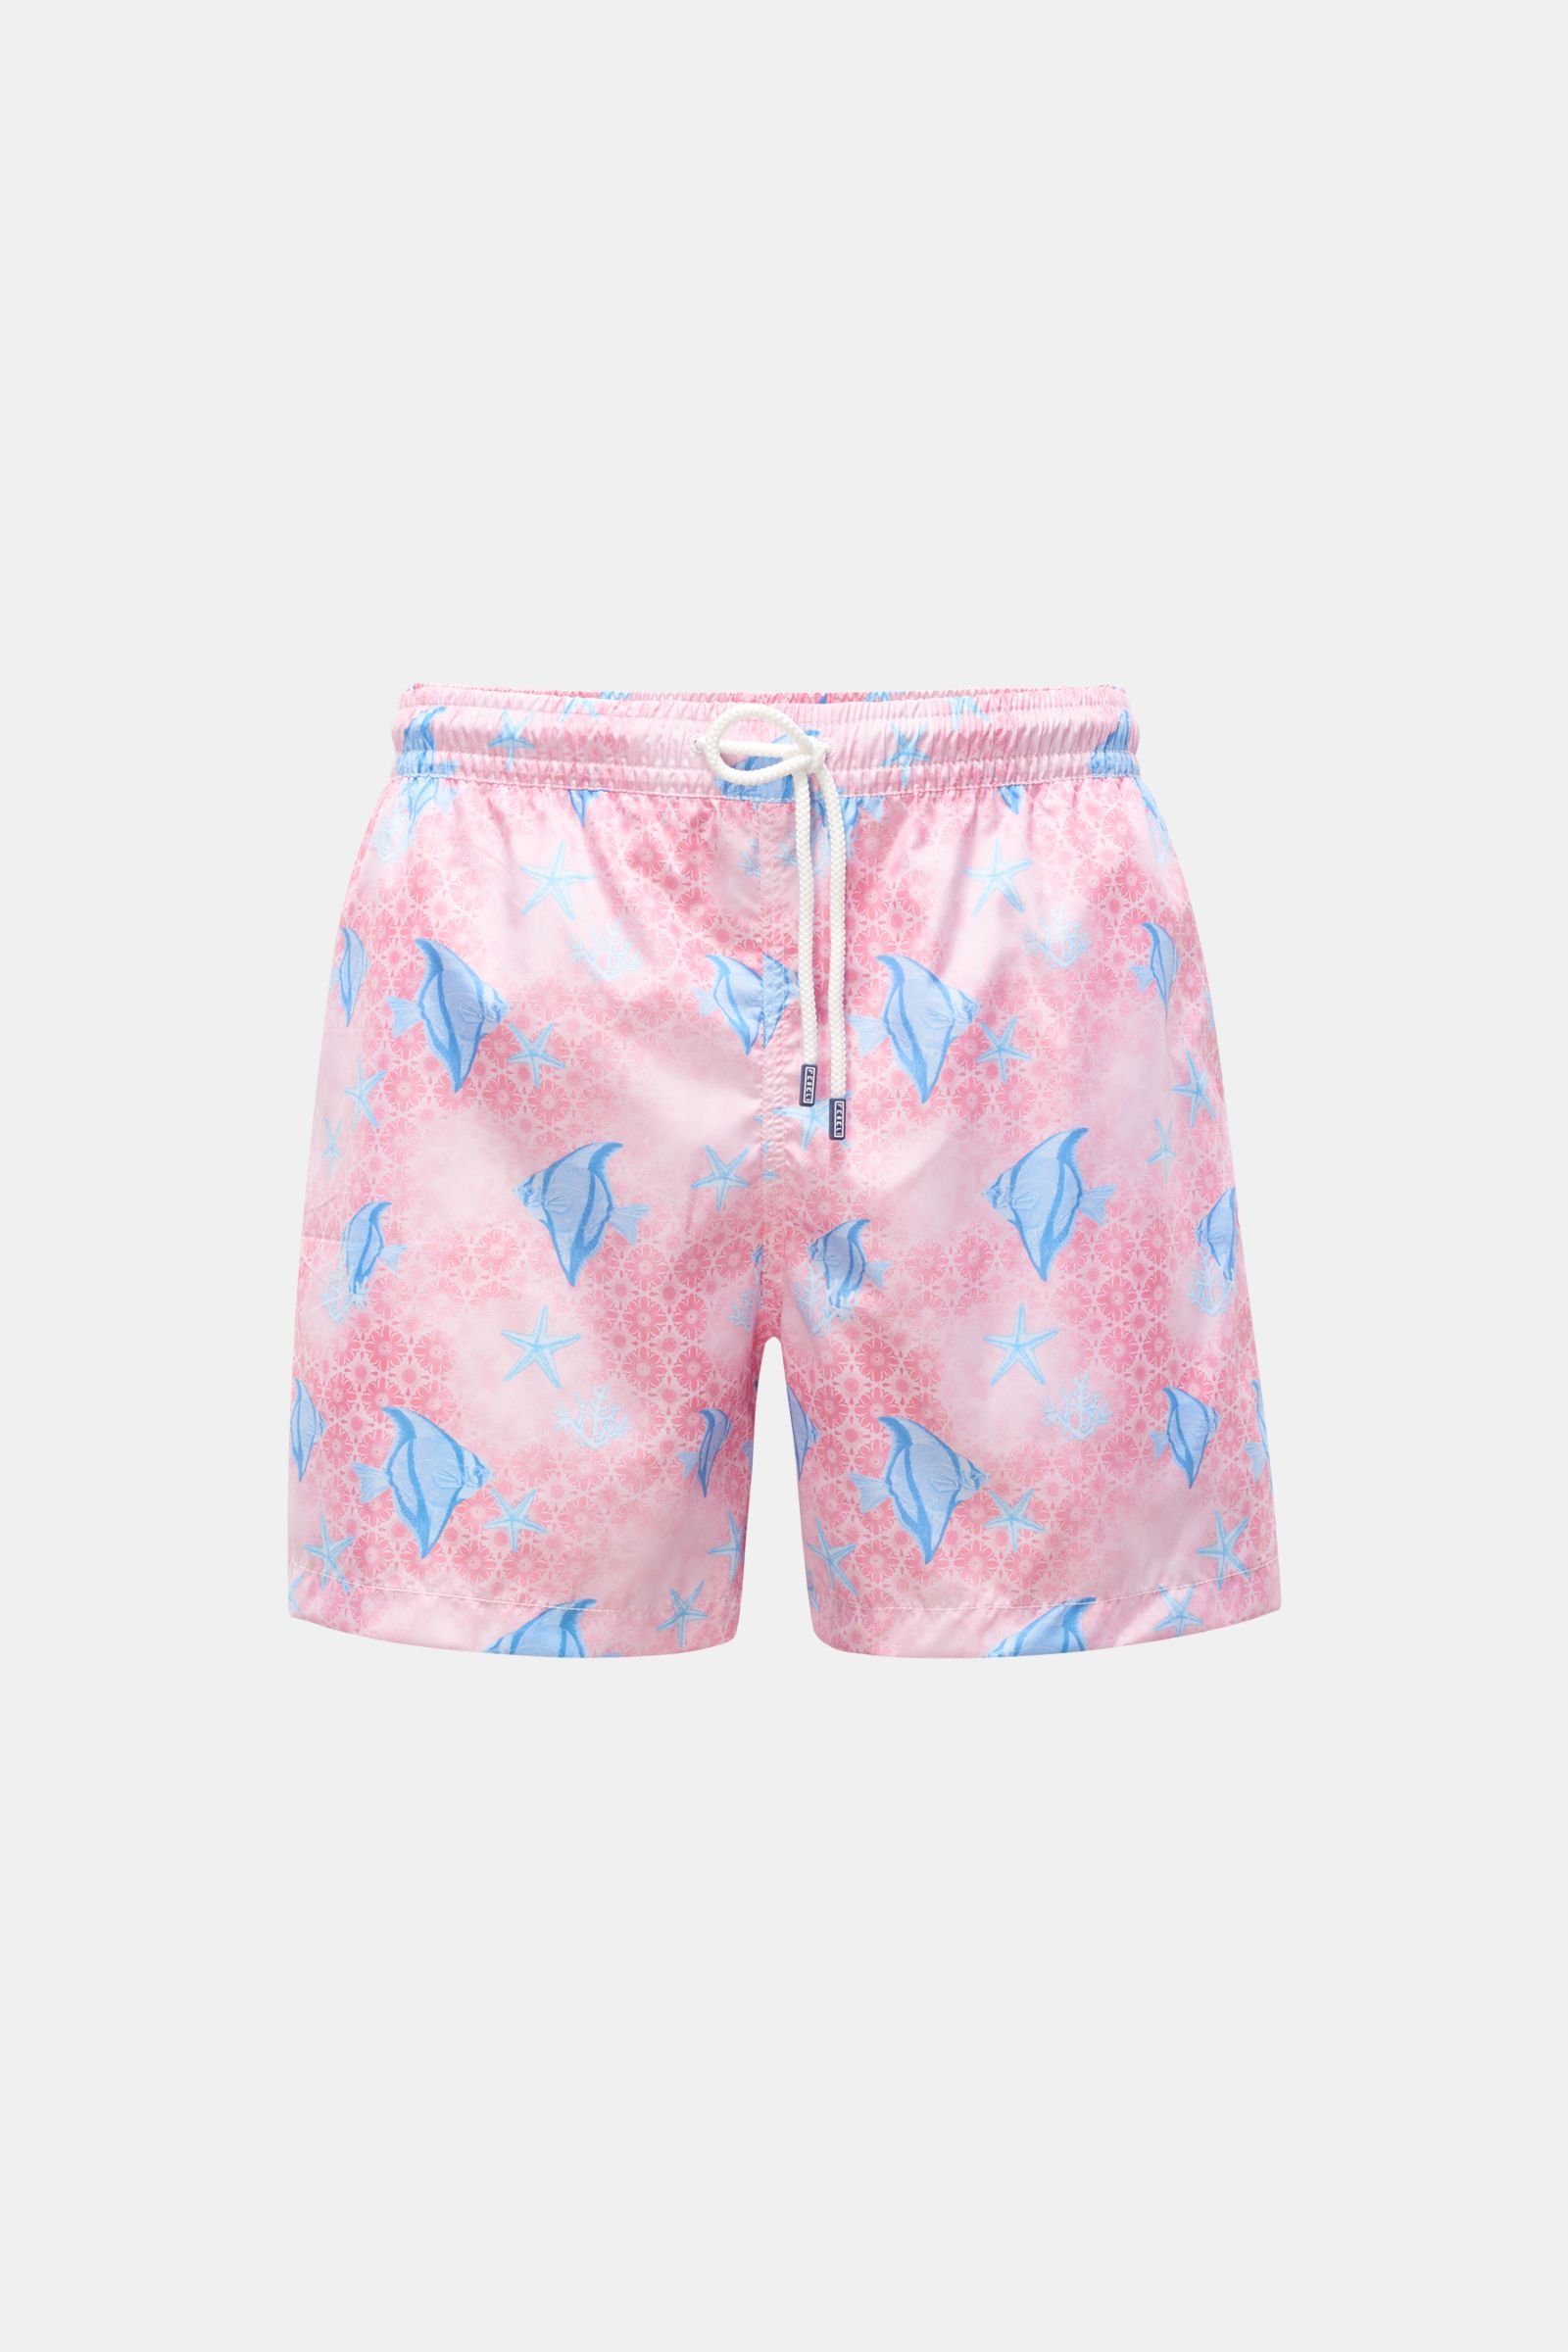 Swim shorts 'Madeira Airstop' rose/light blue patterned